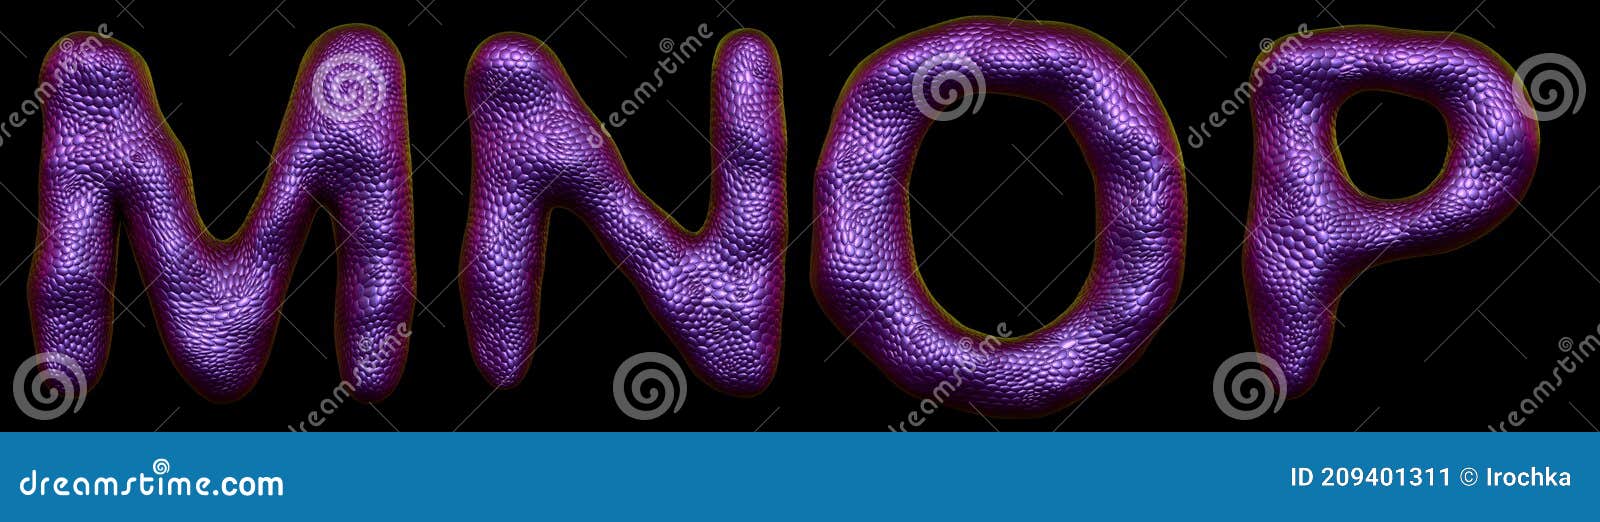 set of letters m, n, o, p made of realistic 3d render natural purple snake skin texture.